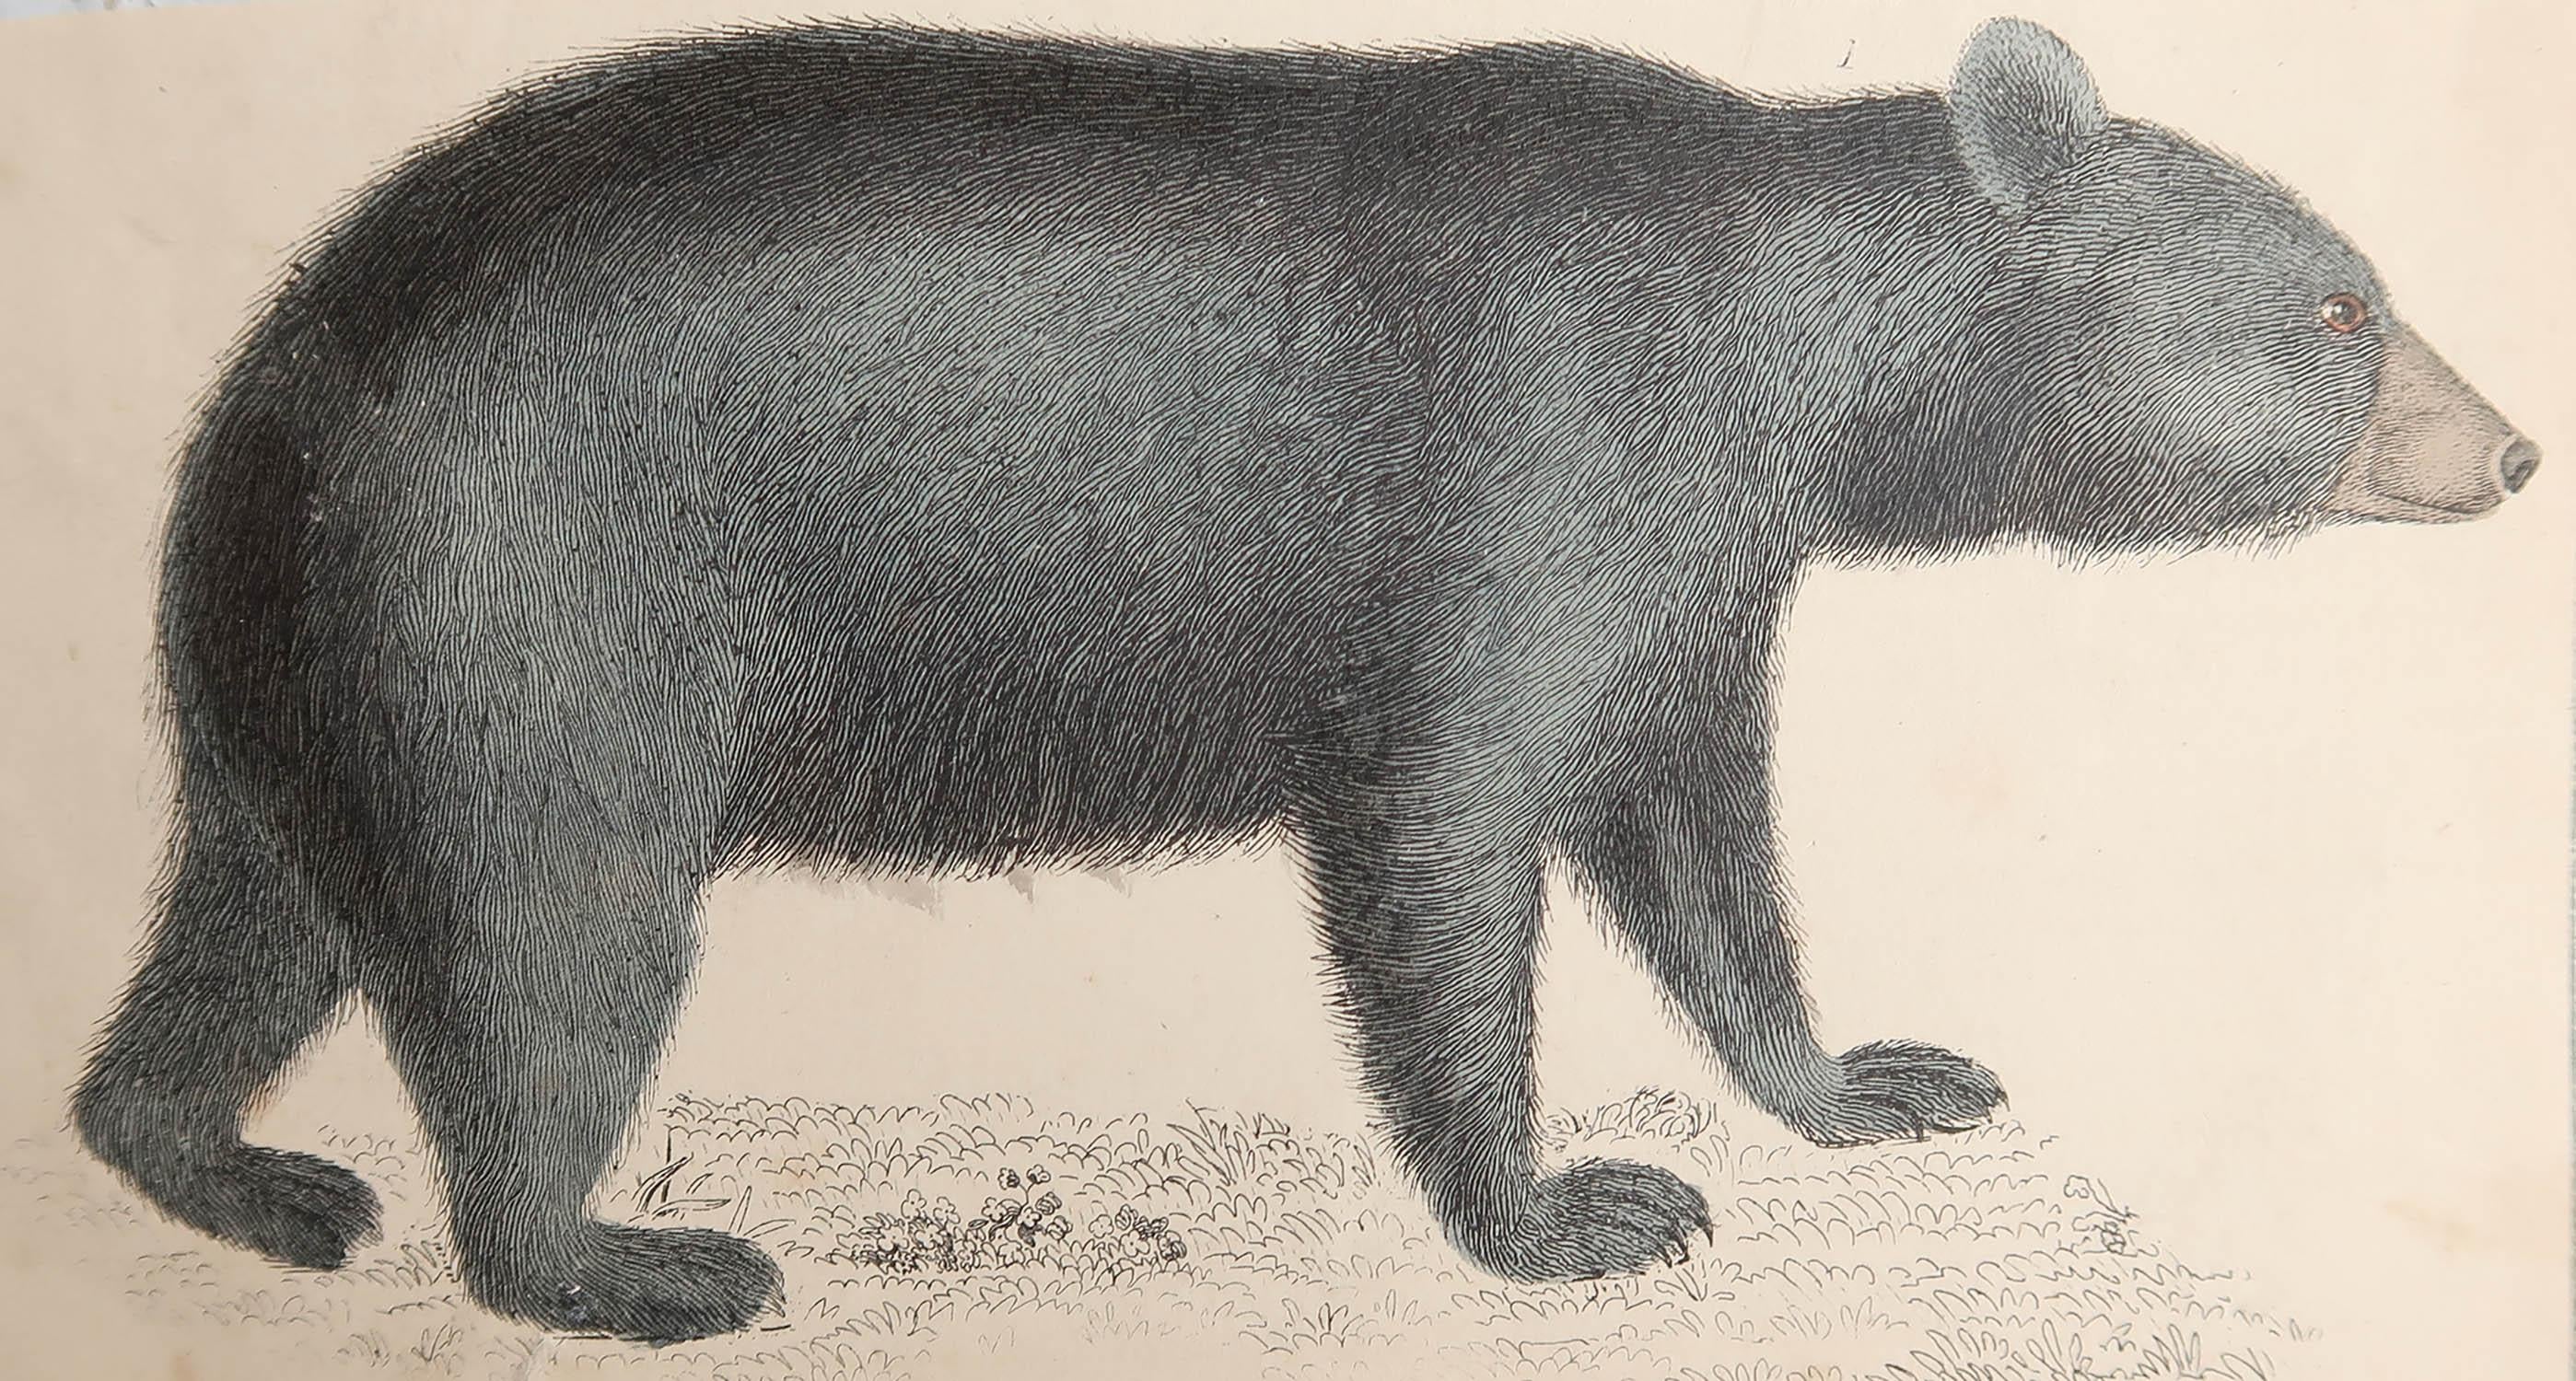 Great image of a black bear.

Unframed. It gives you the option of perhaps making a set up using your own choice of frames.

Lithograph after Captain Brown with original hand color.

Published 1847.

Free shipping.

Repair to a minor tear bottom